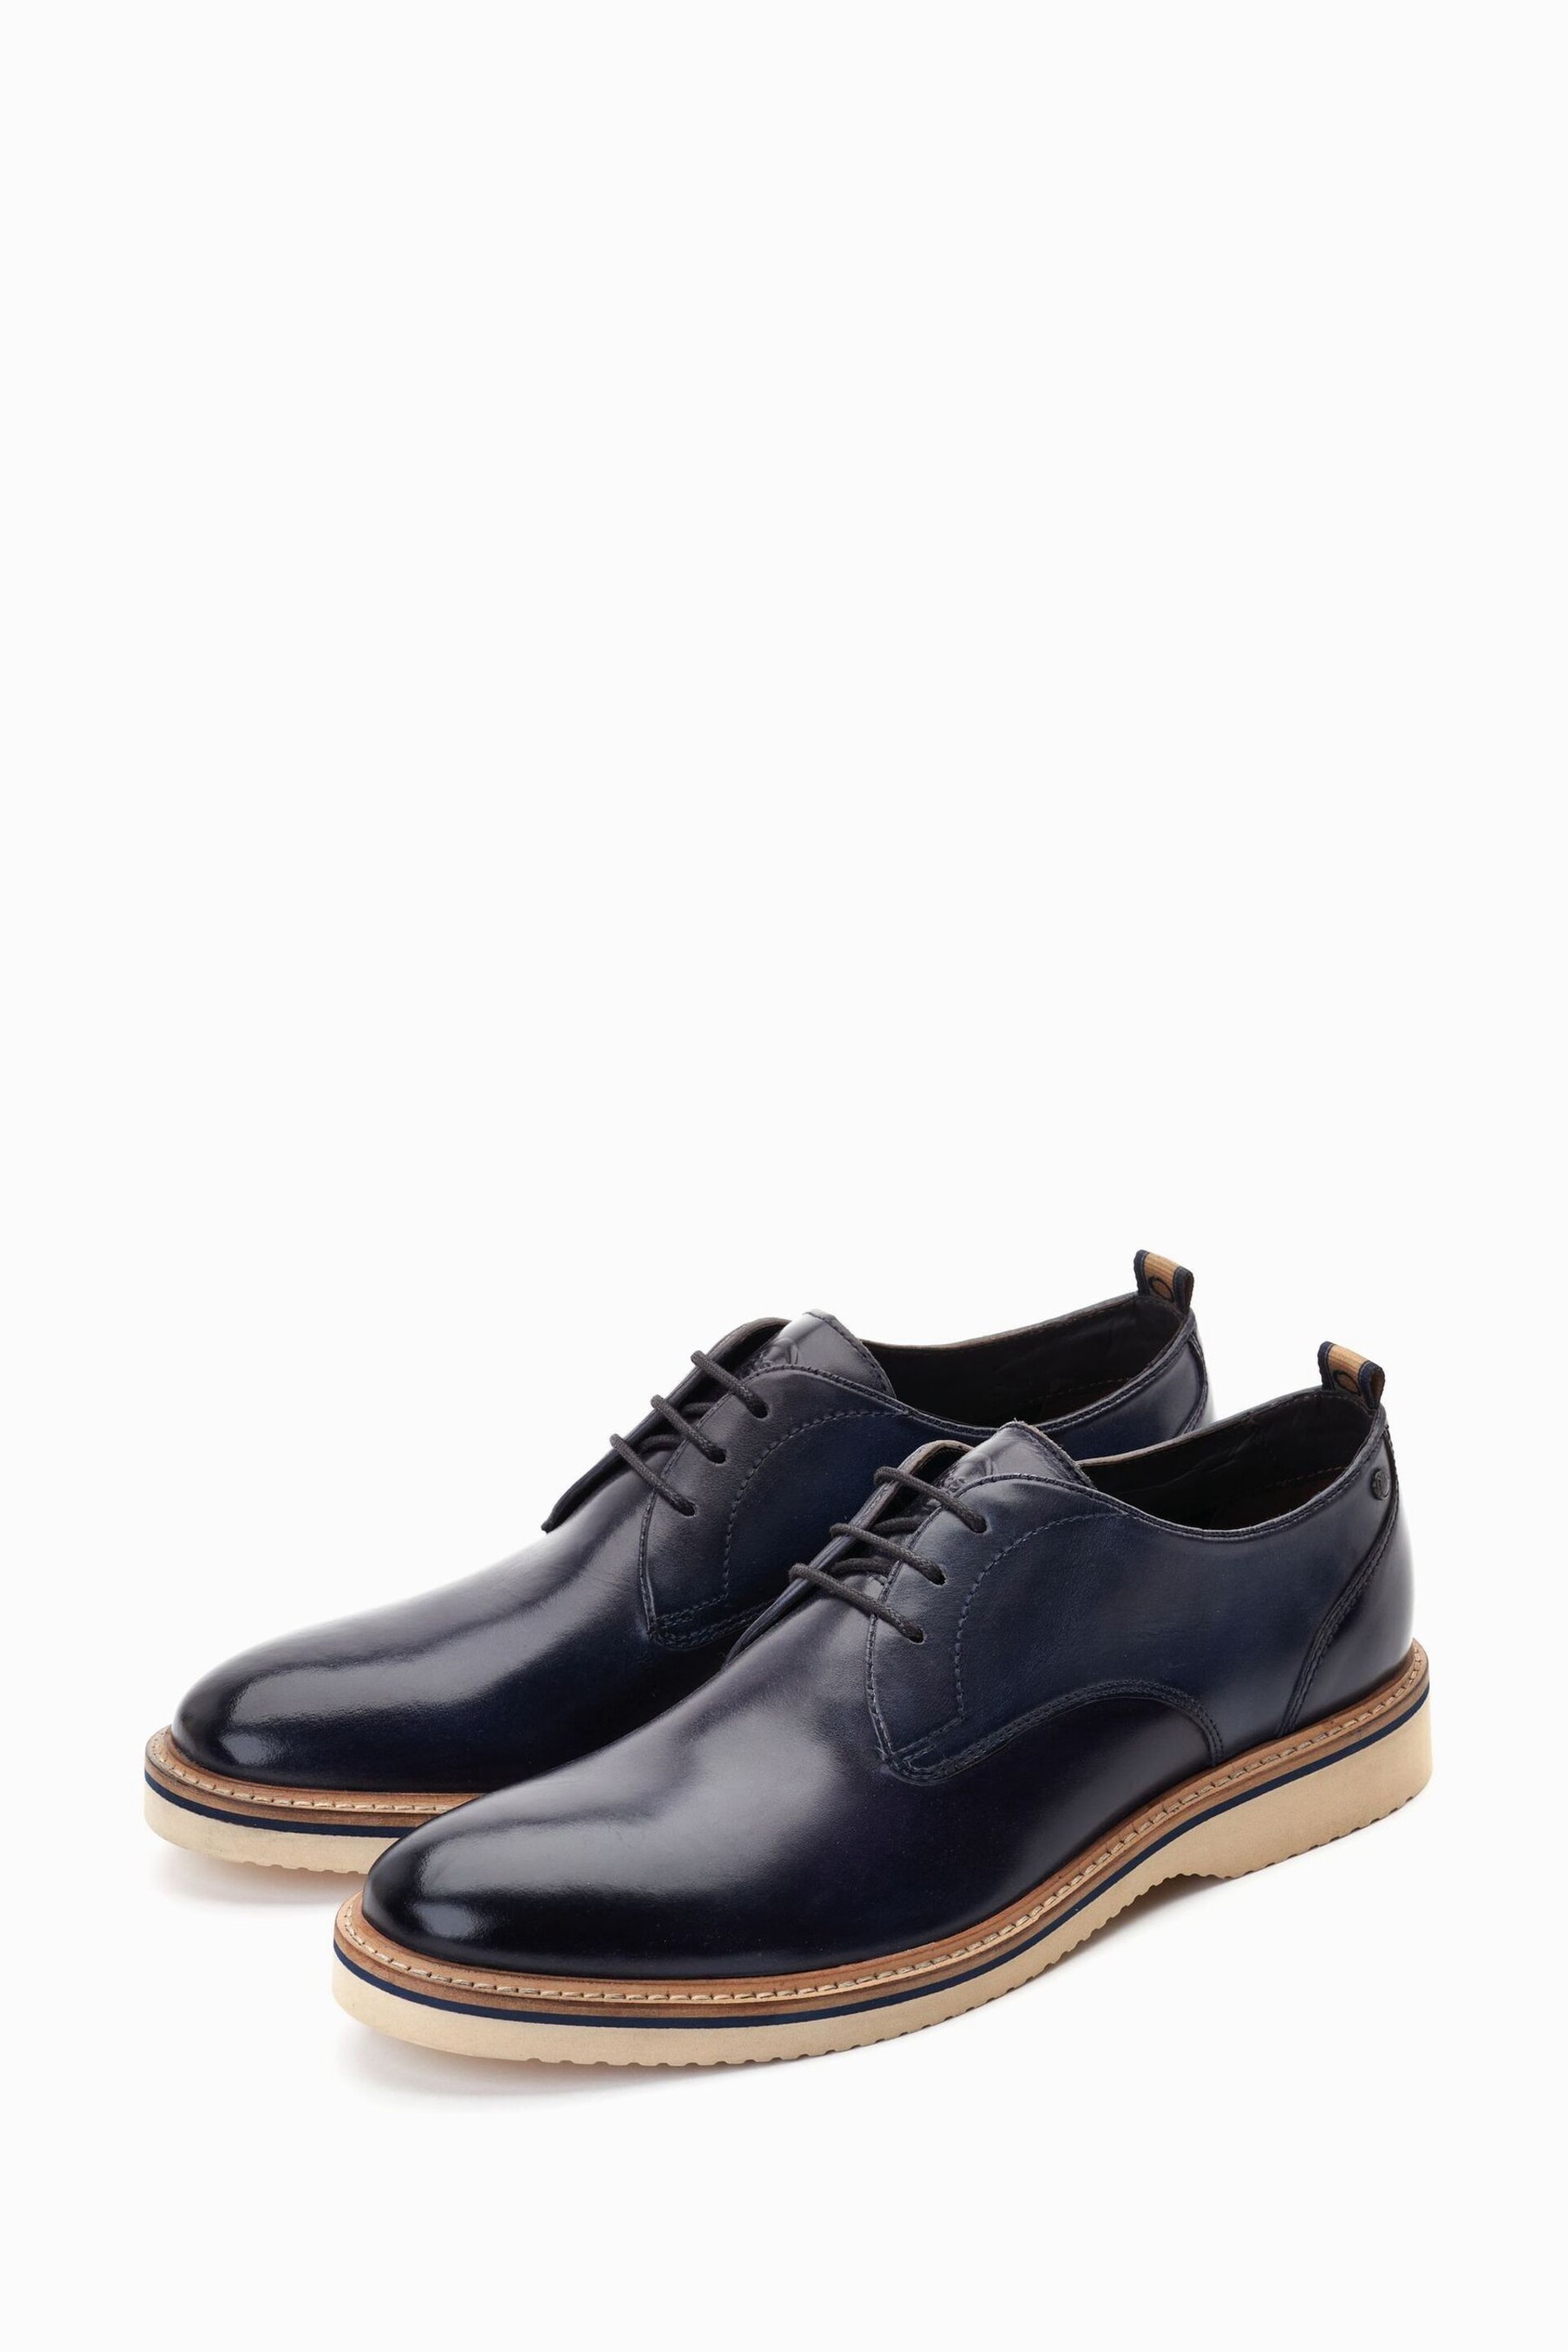 Base London Woody Lace Up Derby Shoes - Image 3 of 6